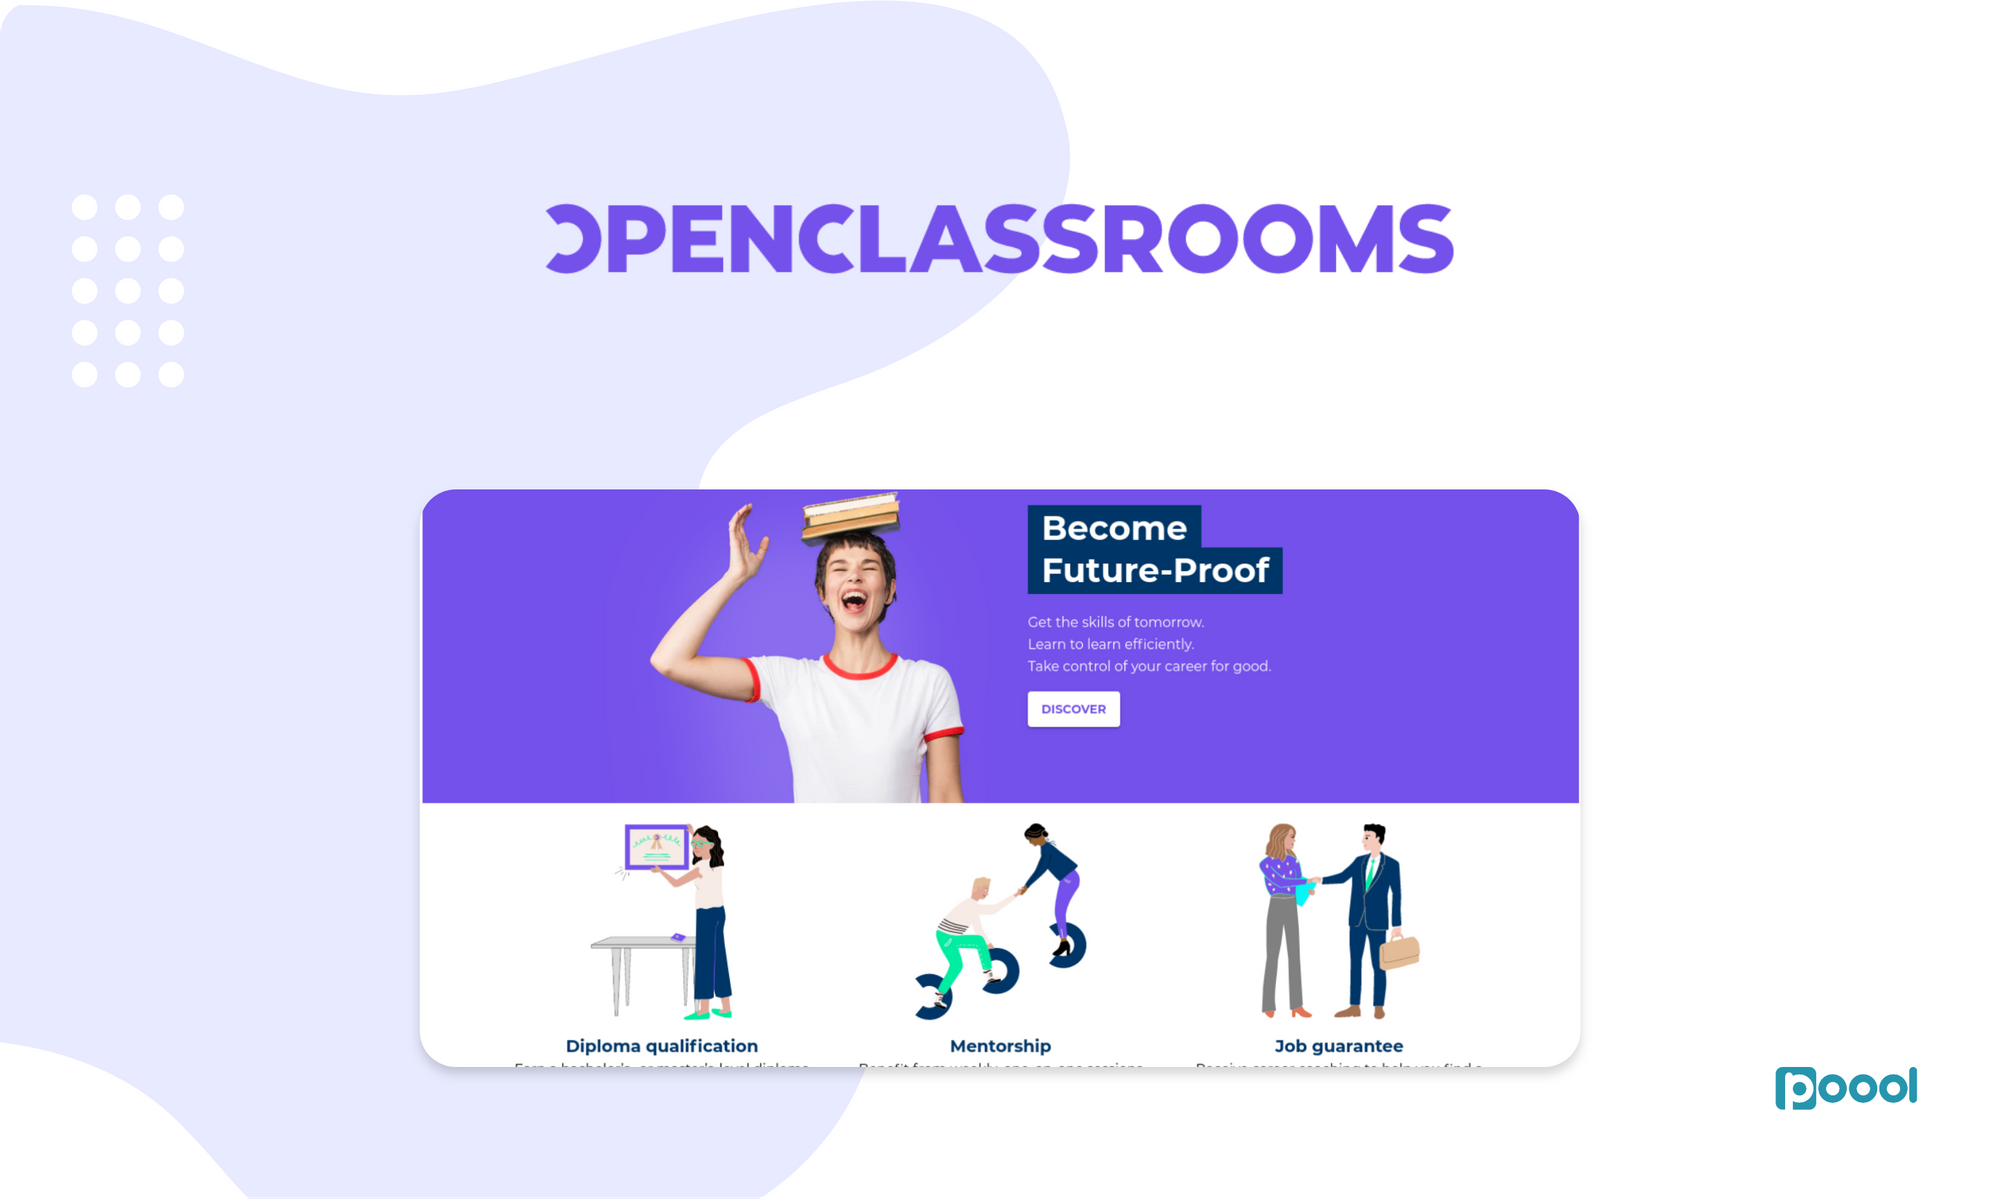 Open Classrooms' Registration Wall: From Content, to Registration to Content | Series.